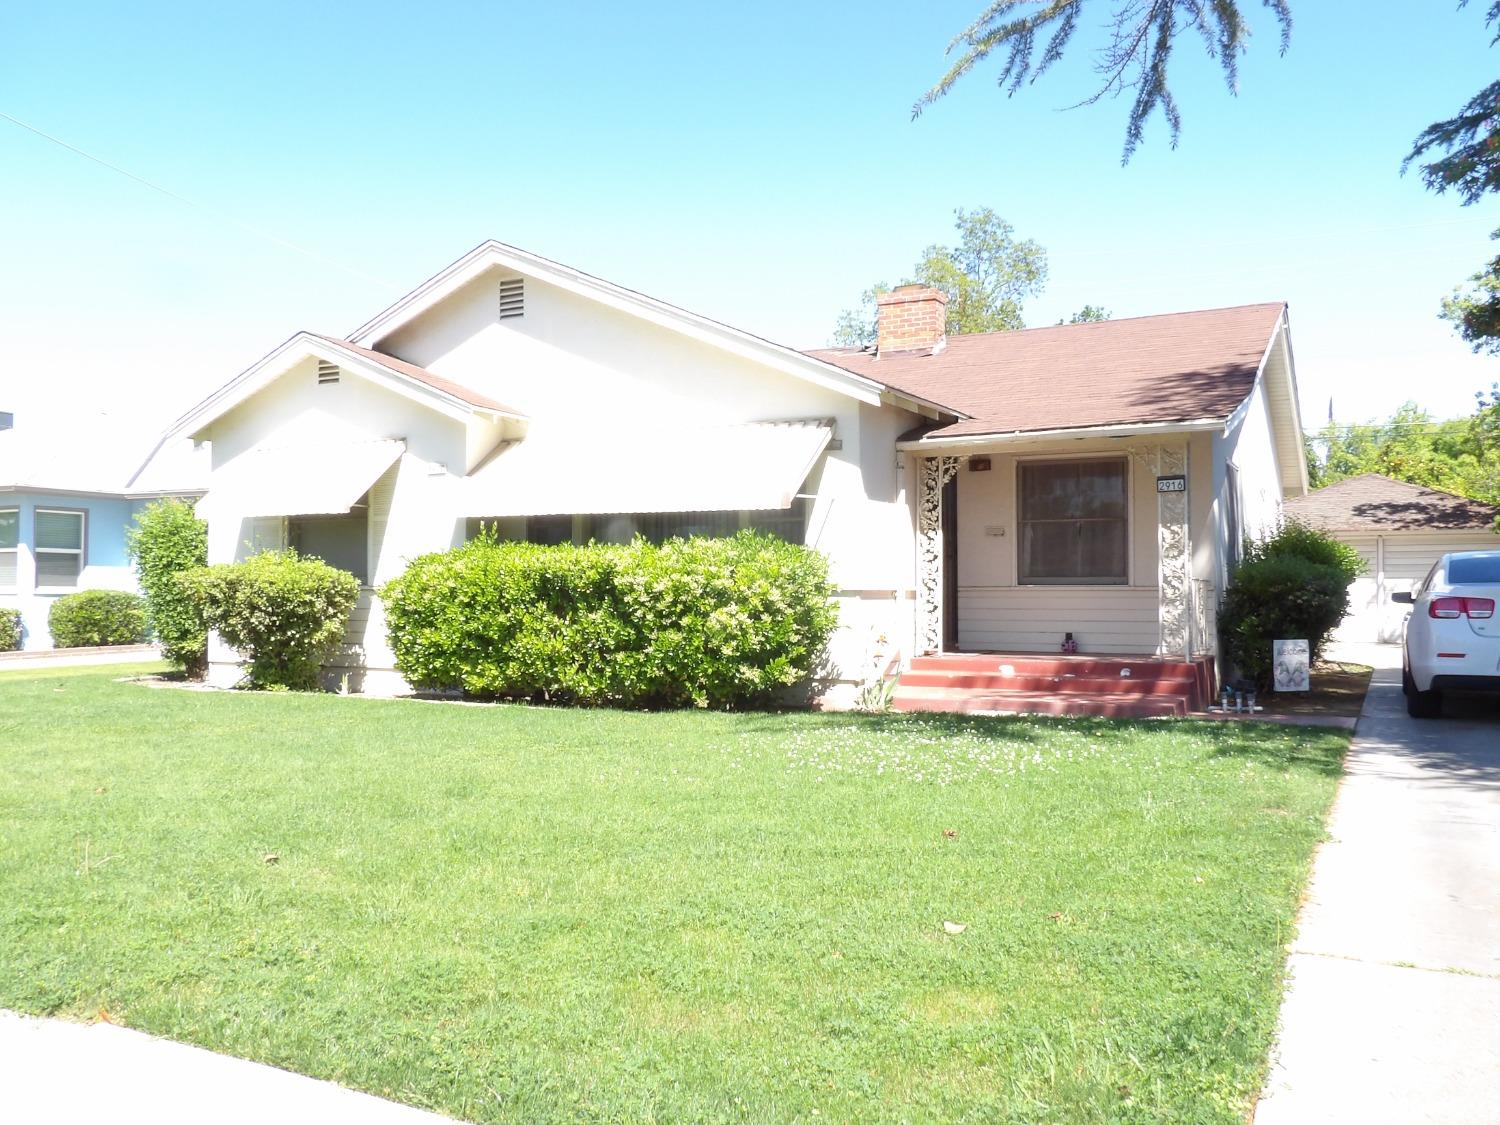 Photo of 2916 N Vagedes Ave in Fresno, CA